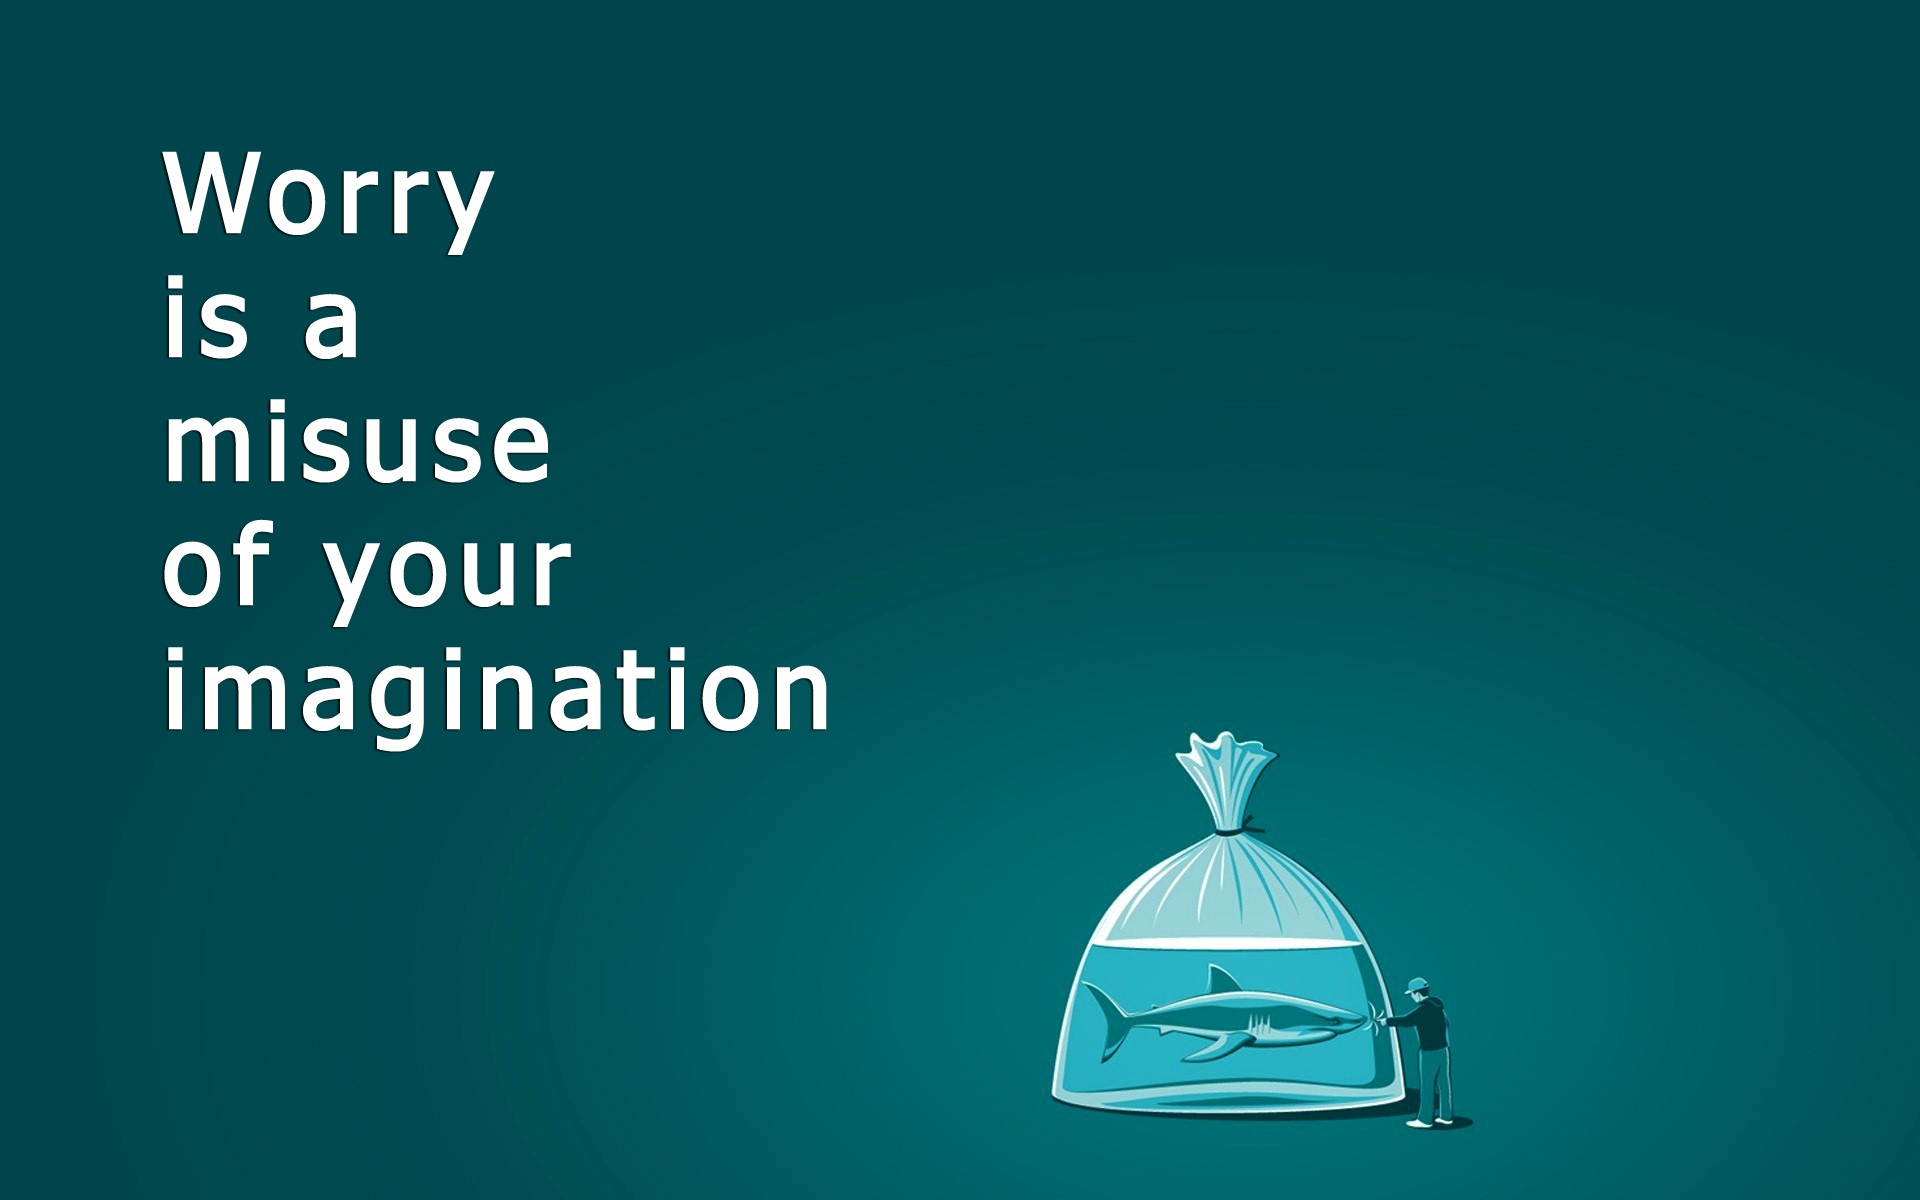 Quote on Imagination HD Desktop Wallpaper Background | HD Wallpapers